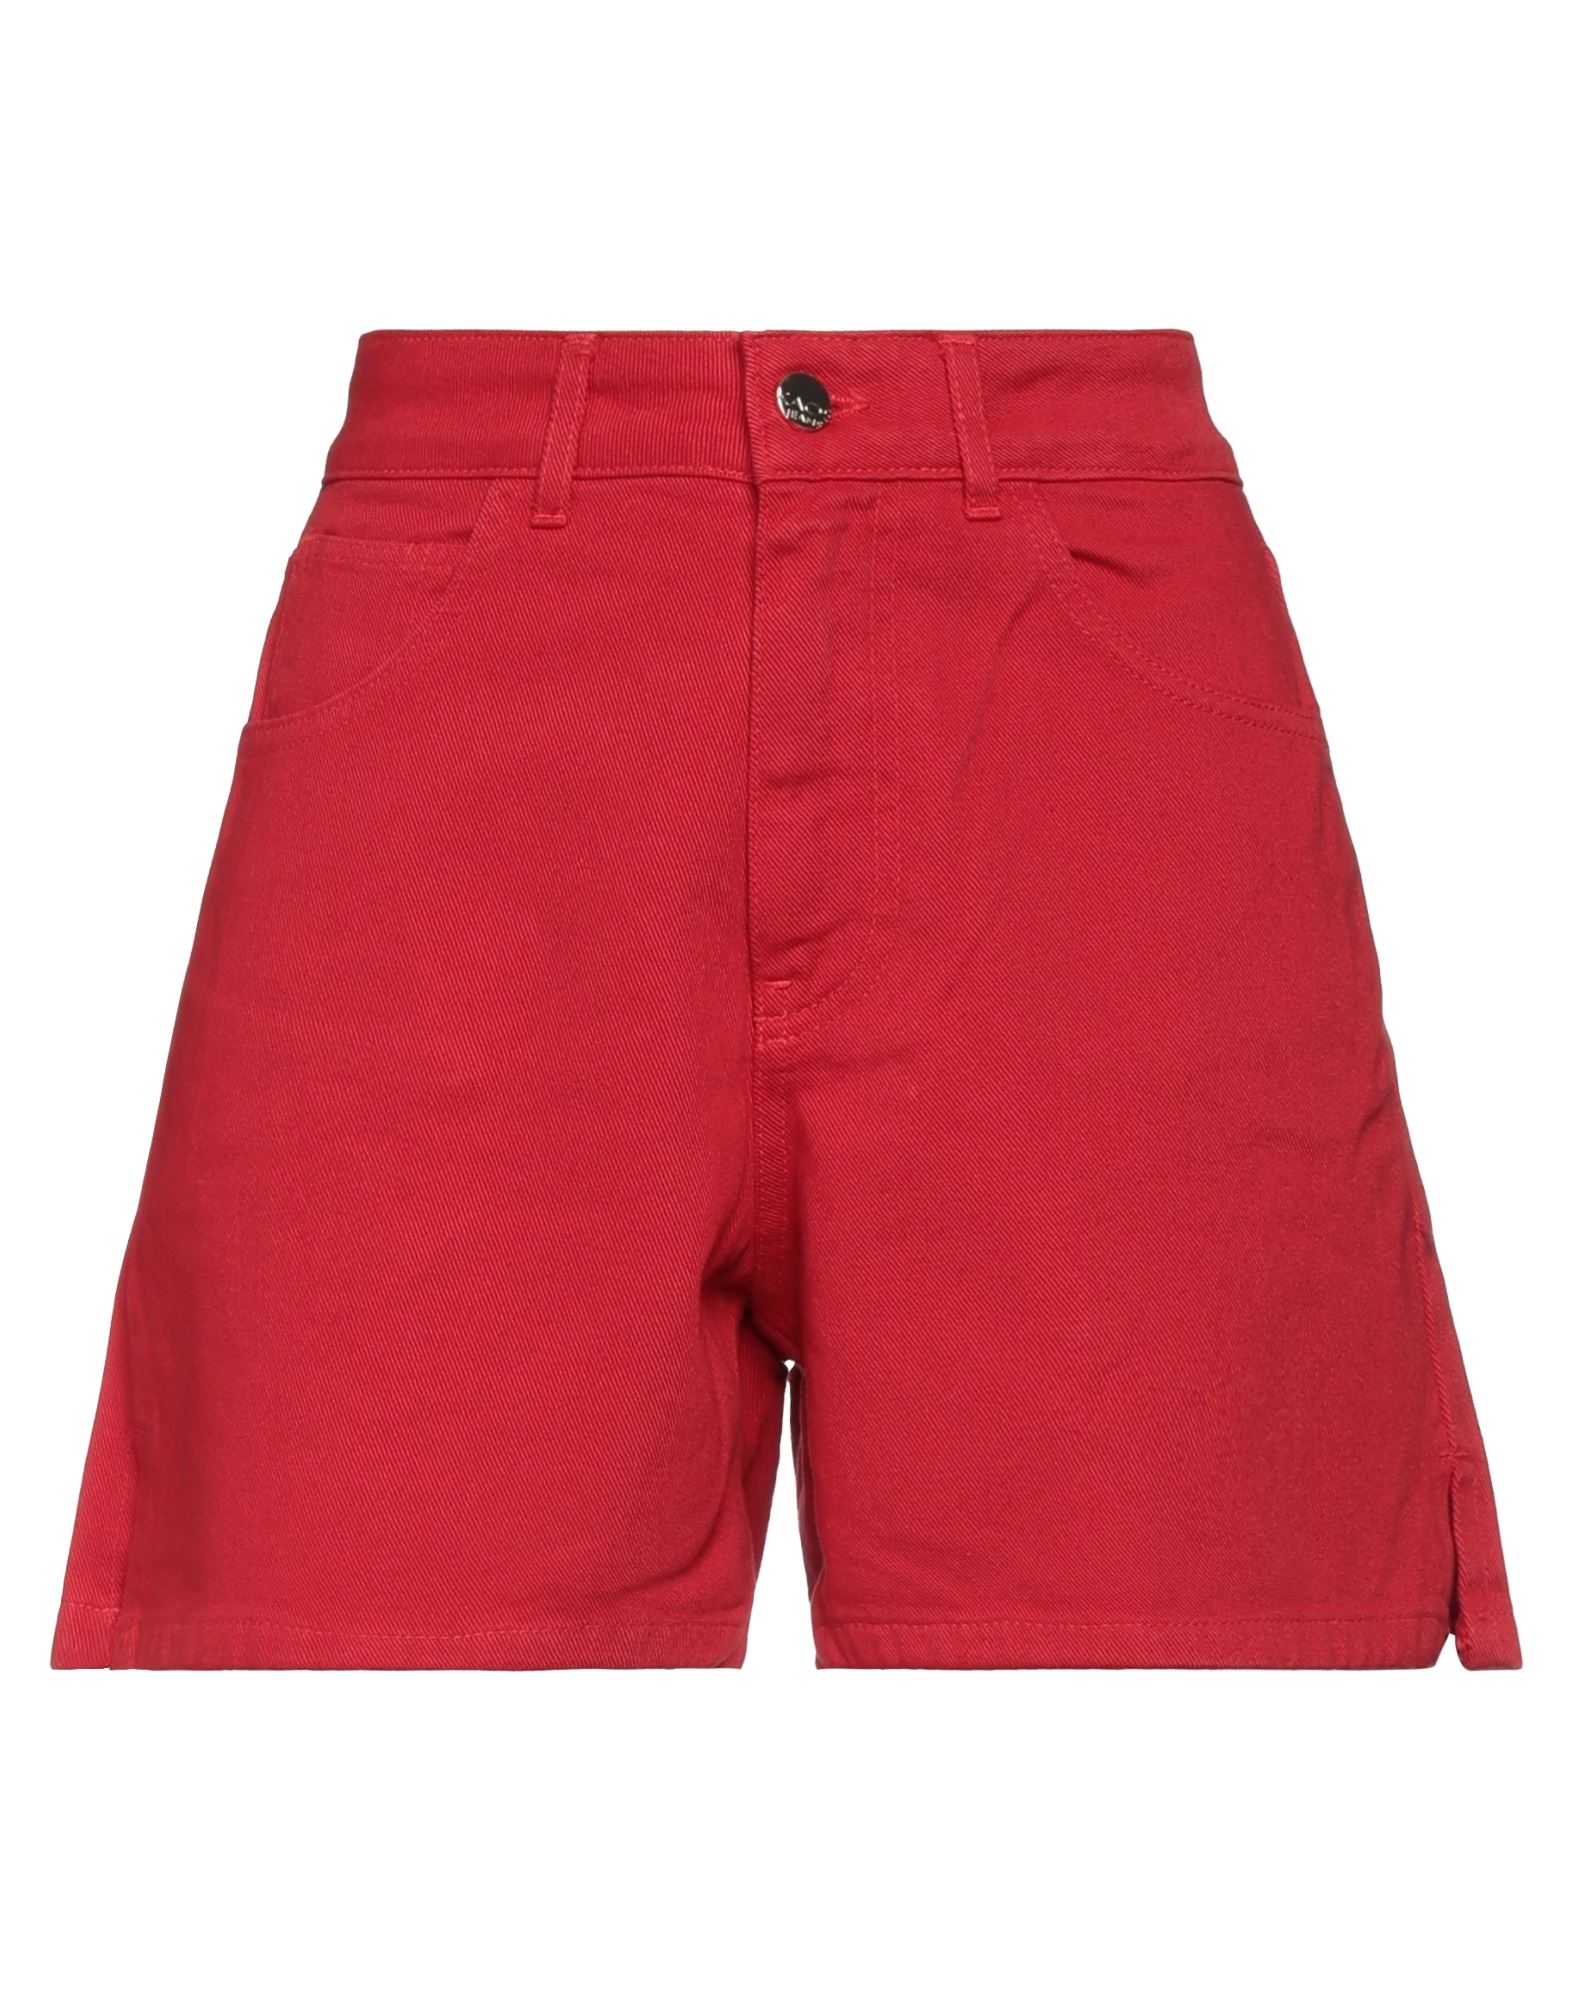 Kaos Jeans Denim Shorts In Red